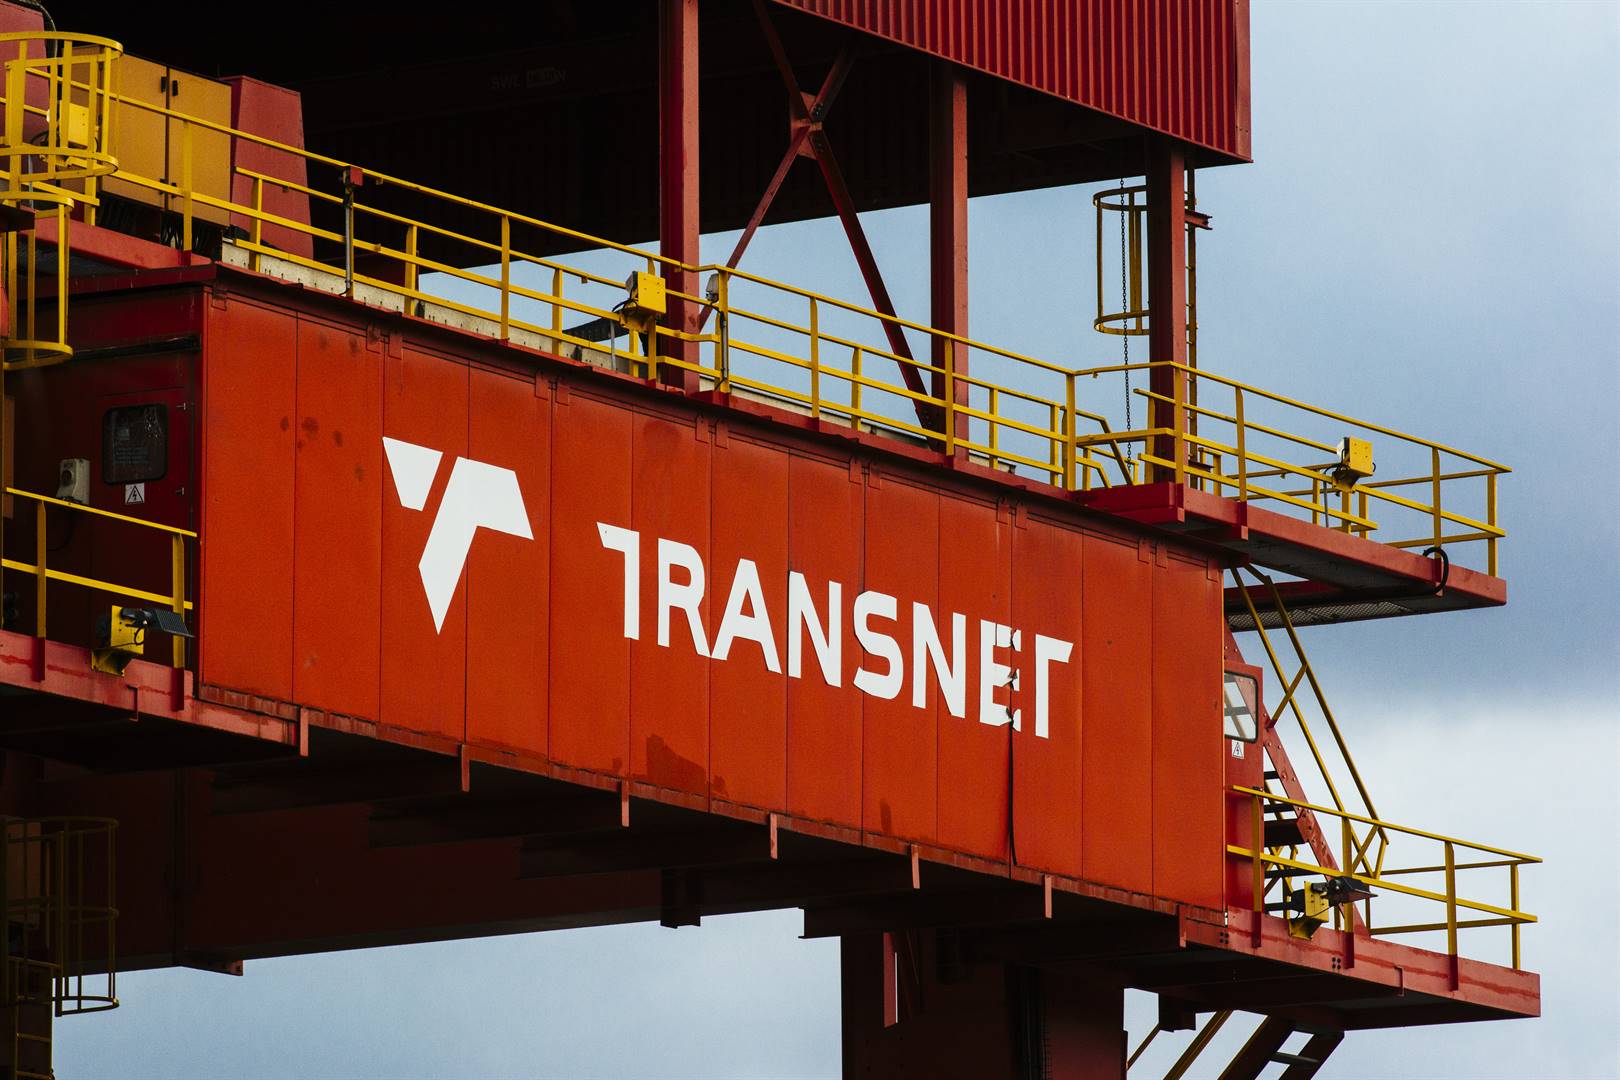 Transnet has submitted a list of preferred candidates for appointment to replace its recently departed executives.